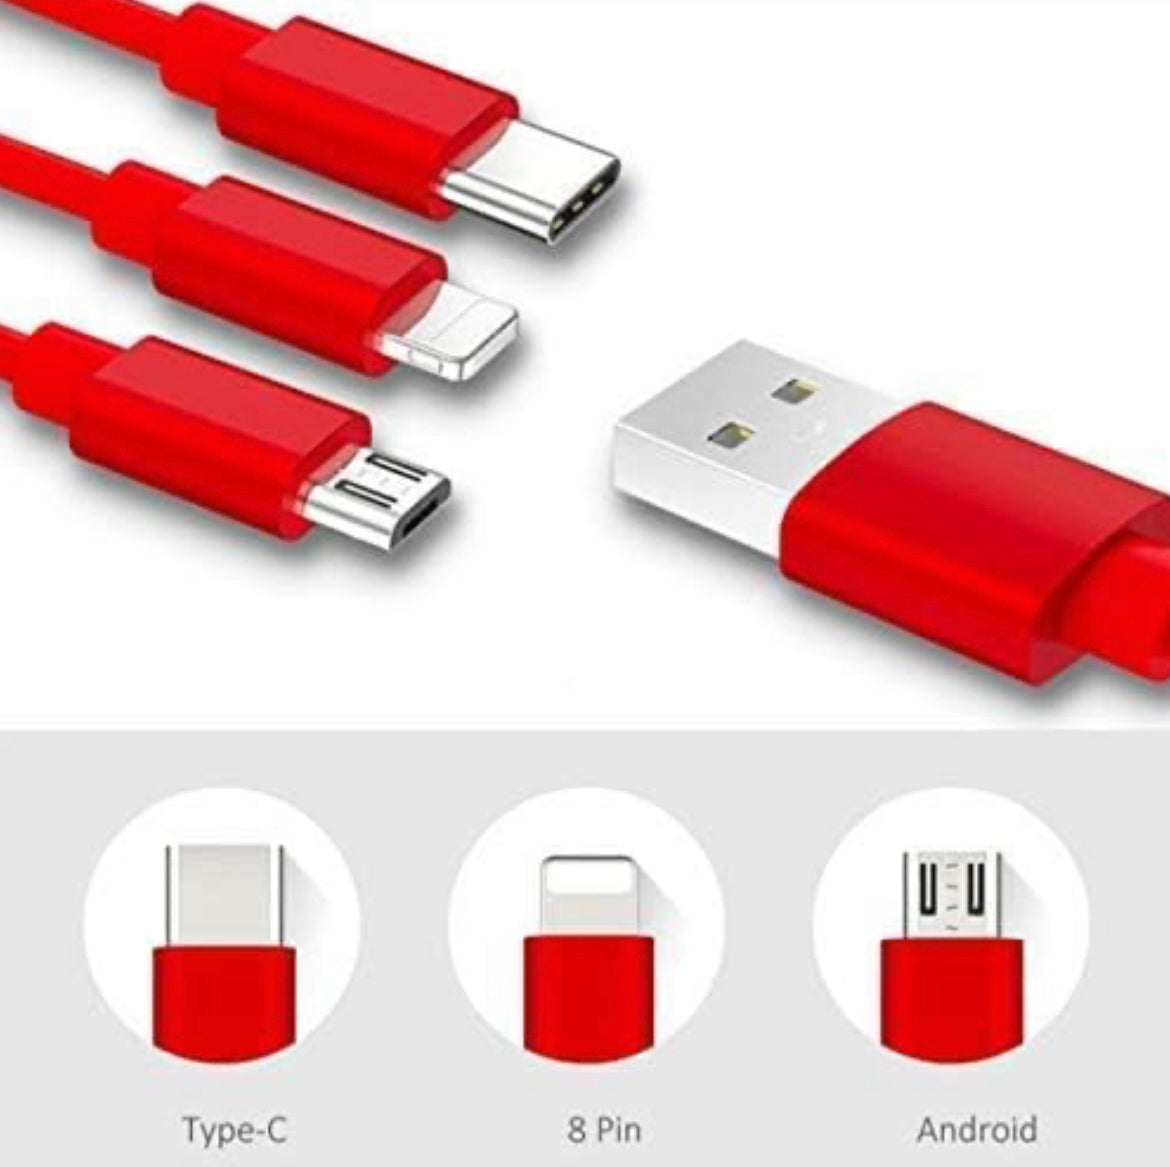 Retractable 3.0A Fast Charger Cord, Multiple Charging Cable 4Ft/1.2m 3-in-1 USB Charge Cord Compatible with Phone/Type C/Micro USB for All Android and iOS Smartphones (Random Colour)